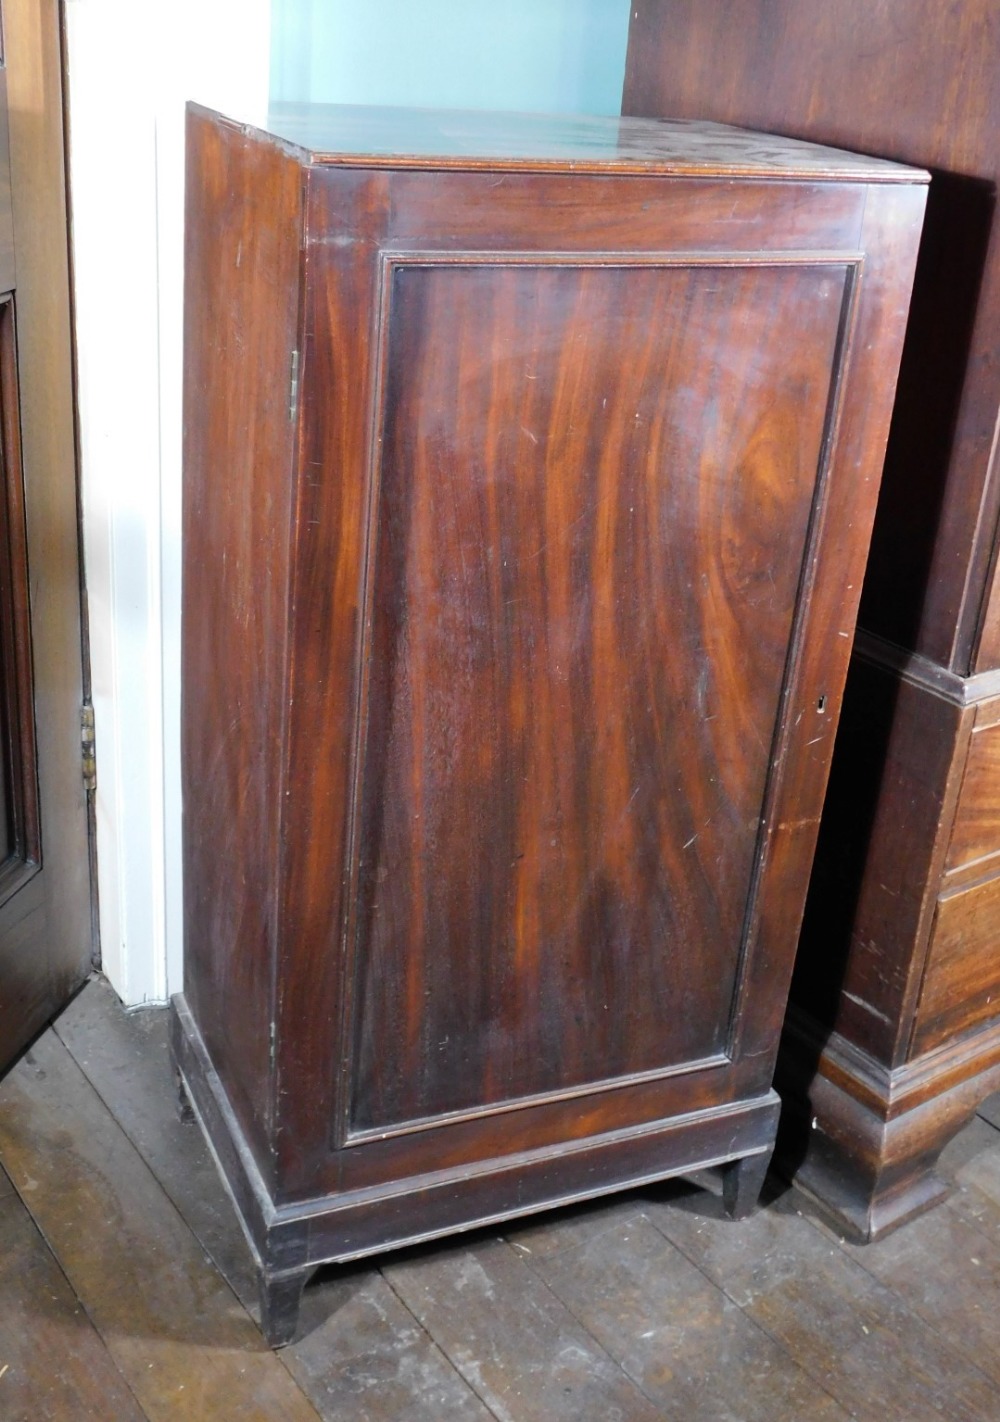 An early 19thC mahogany folio cabinet, the top with a moulded edge and a single panelled door